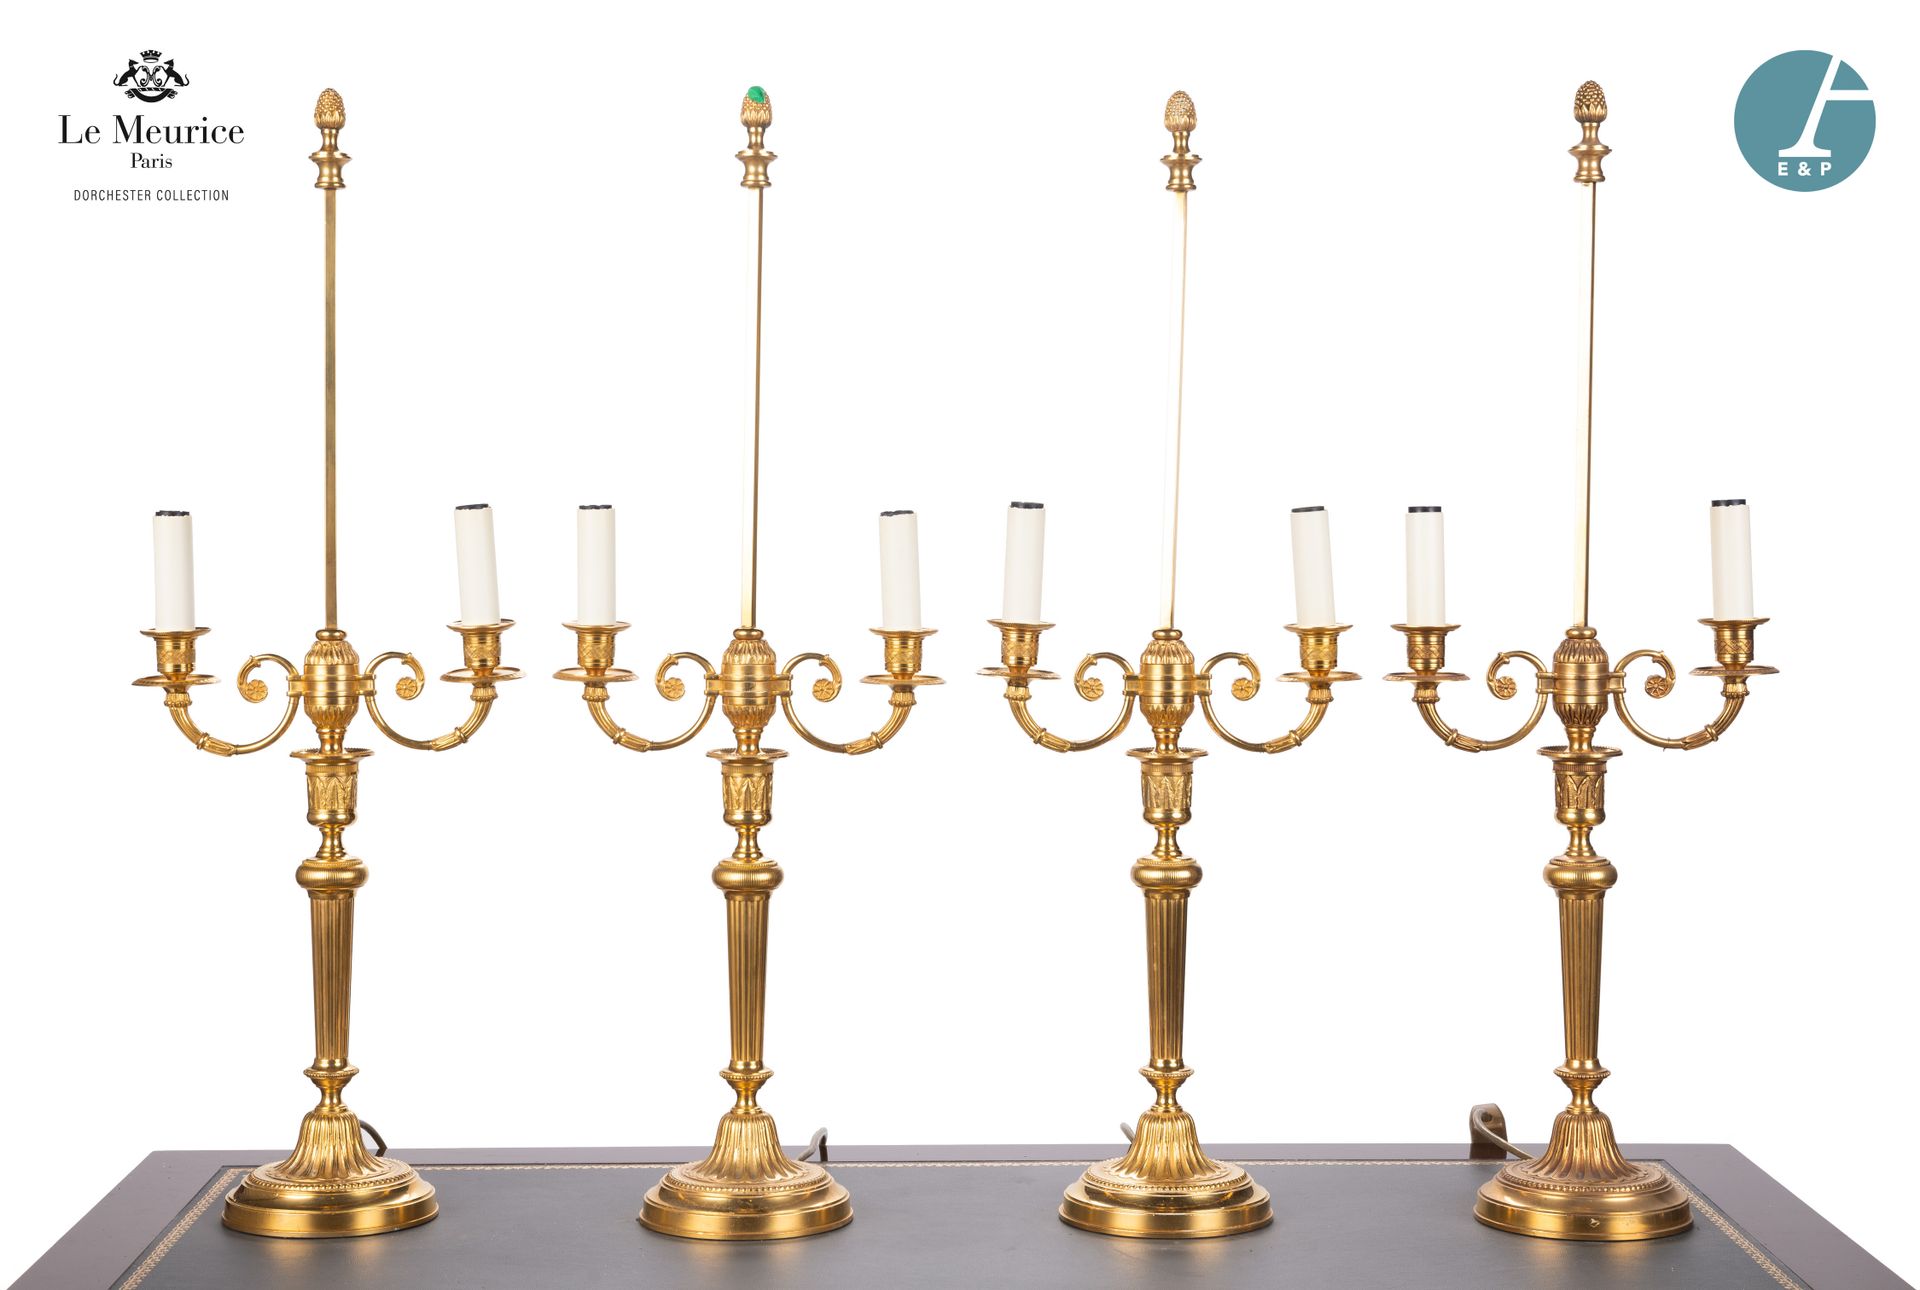 Null From Hôtel Le Meurice.
Set of four ormolu lampstands, with two scrolled lig&hellip;